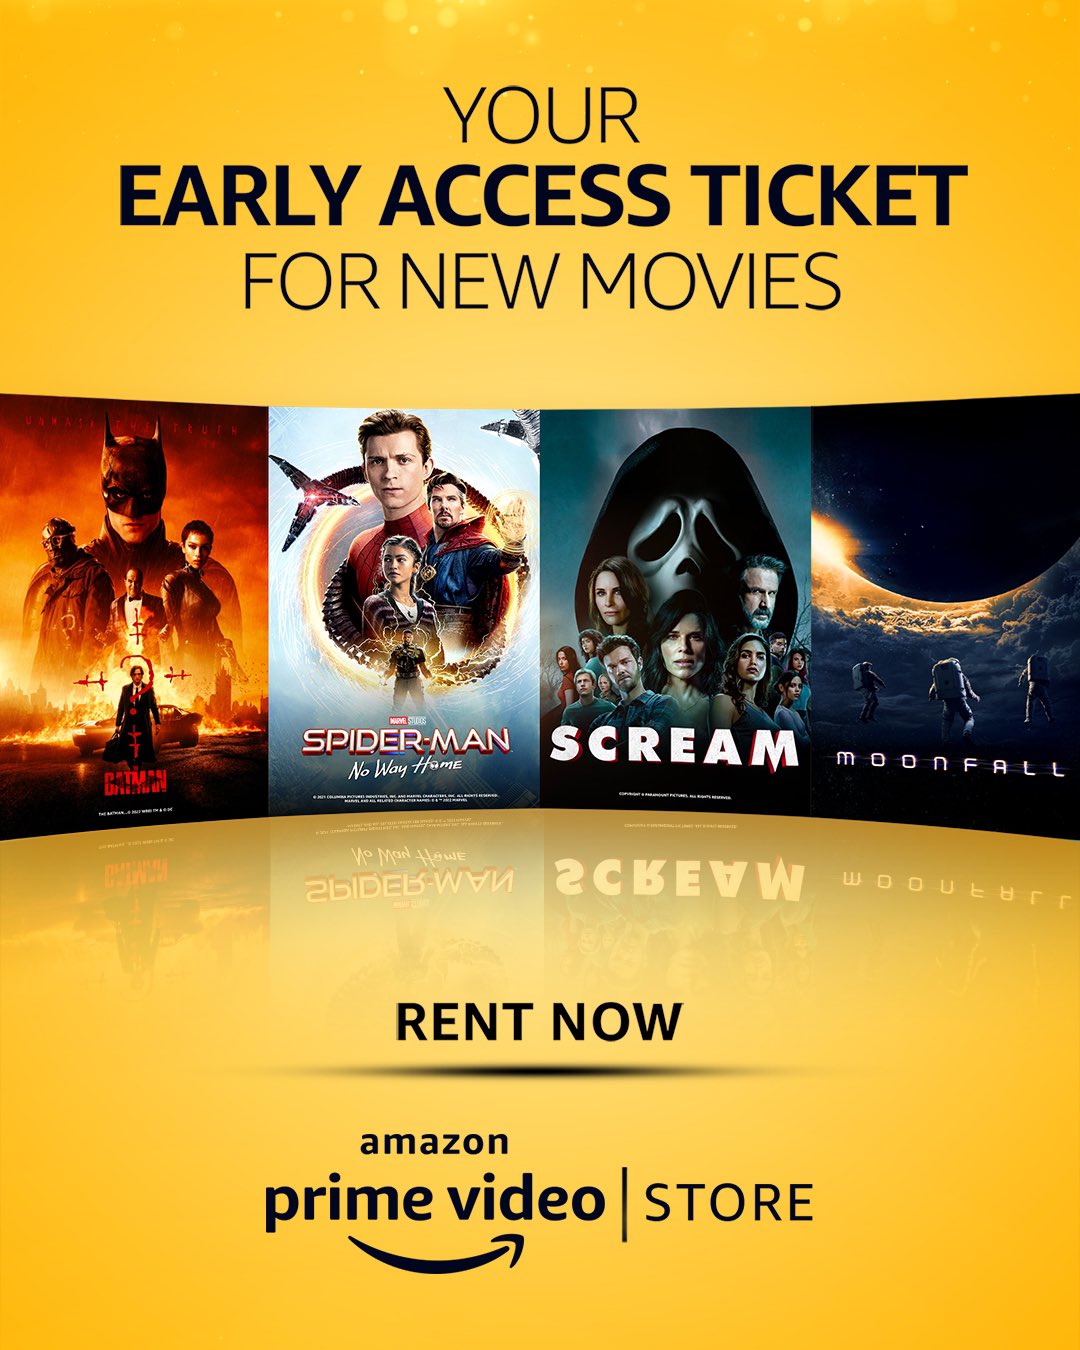 Prime Video In Your Early Access Ticket To New Movies Is Here Introducing Movie Rentals On Prime Video Store Now Rent Latest Popular Movies In English Hindi Tamil Telugu Malayalam